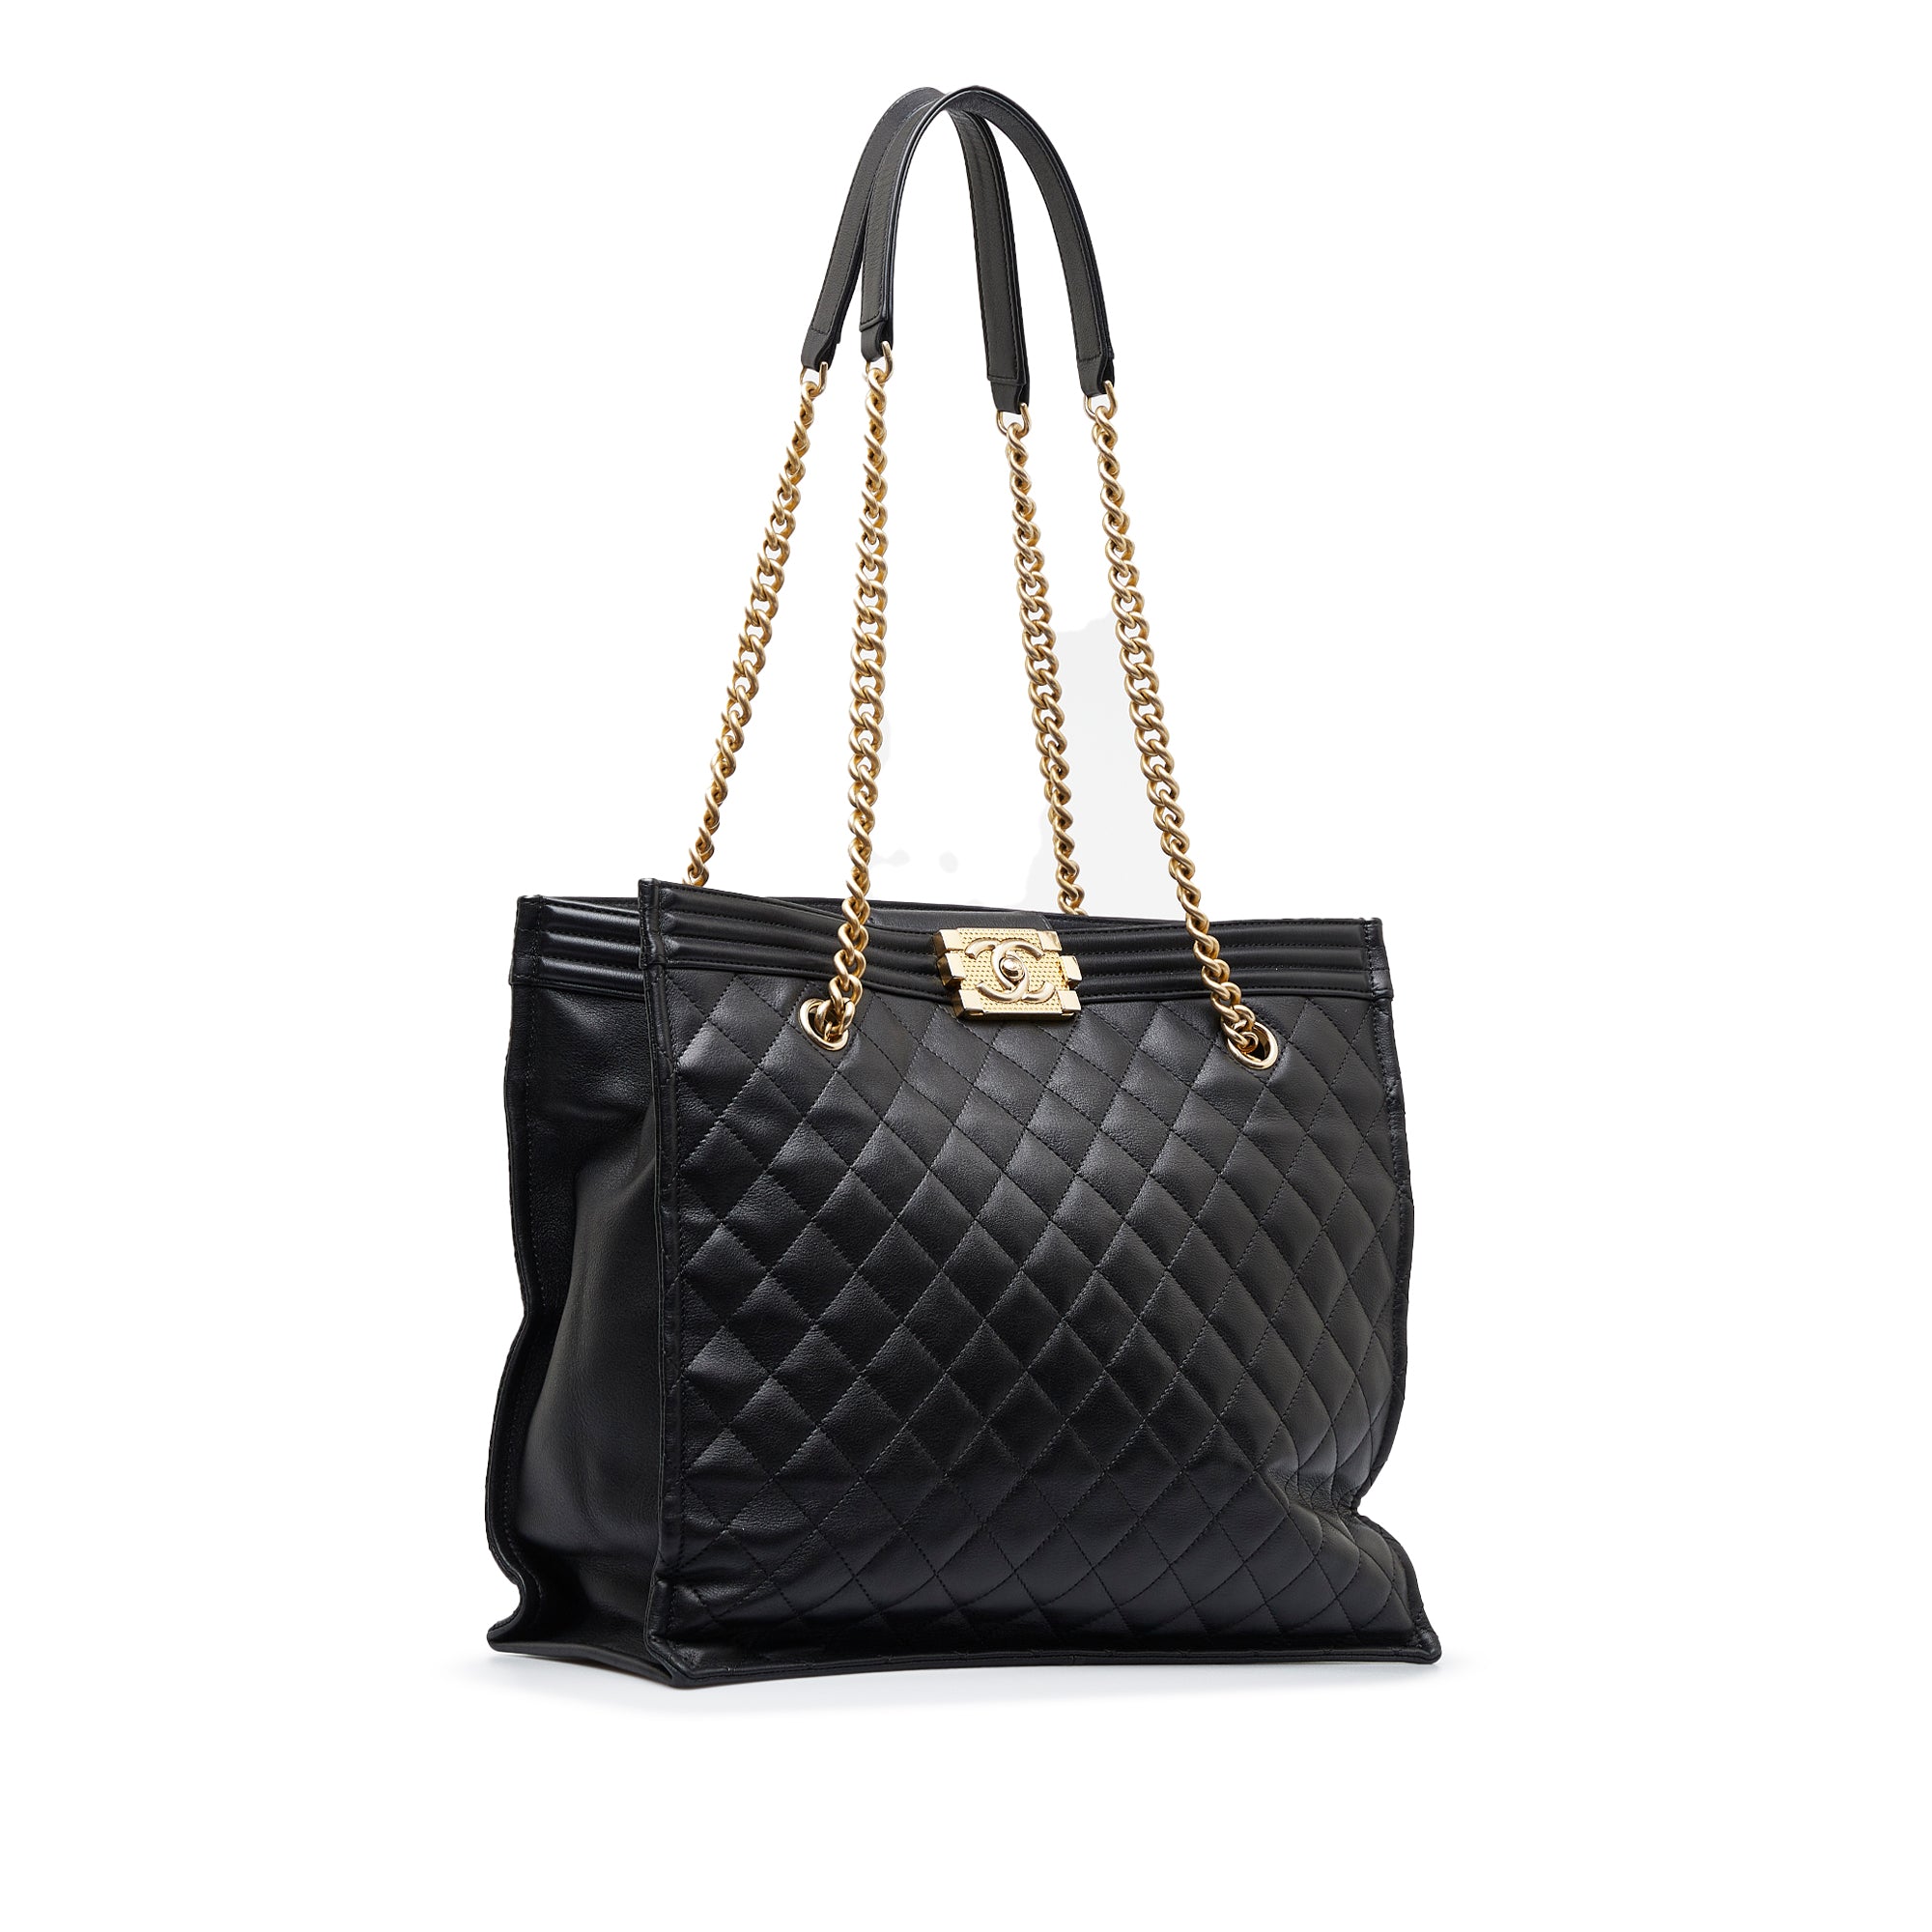 Black Chanel Quilted Boy Shopper Tote